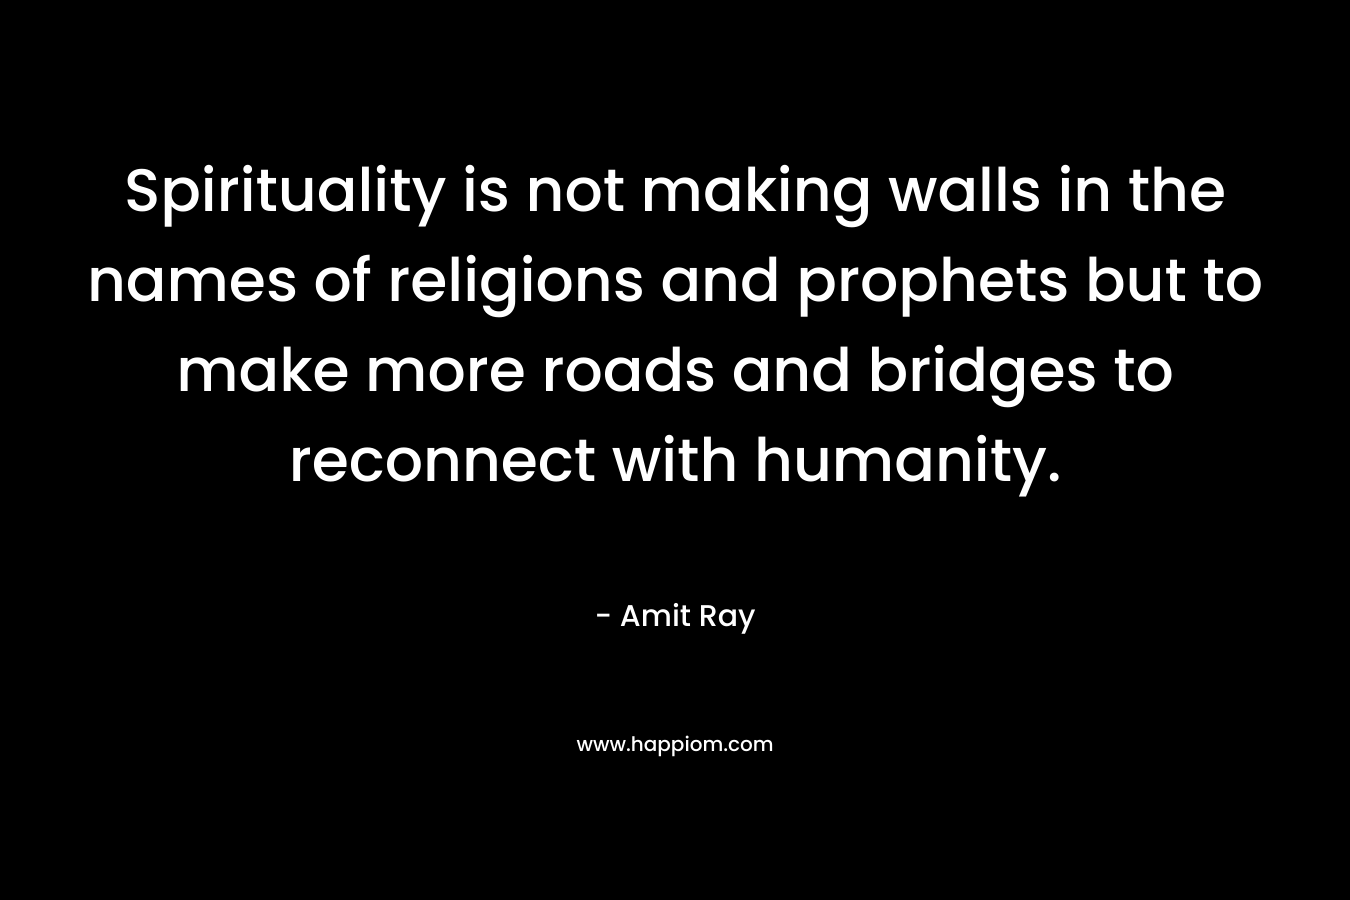 Spirituality is not making walls in the names of religions and prophets but to make more roads and bridges to reconnect with humanity. – Amit Ray